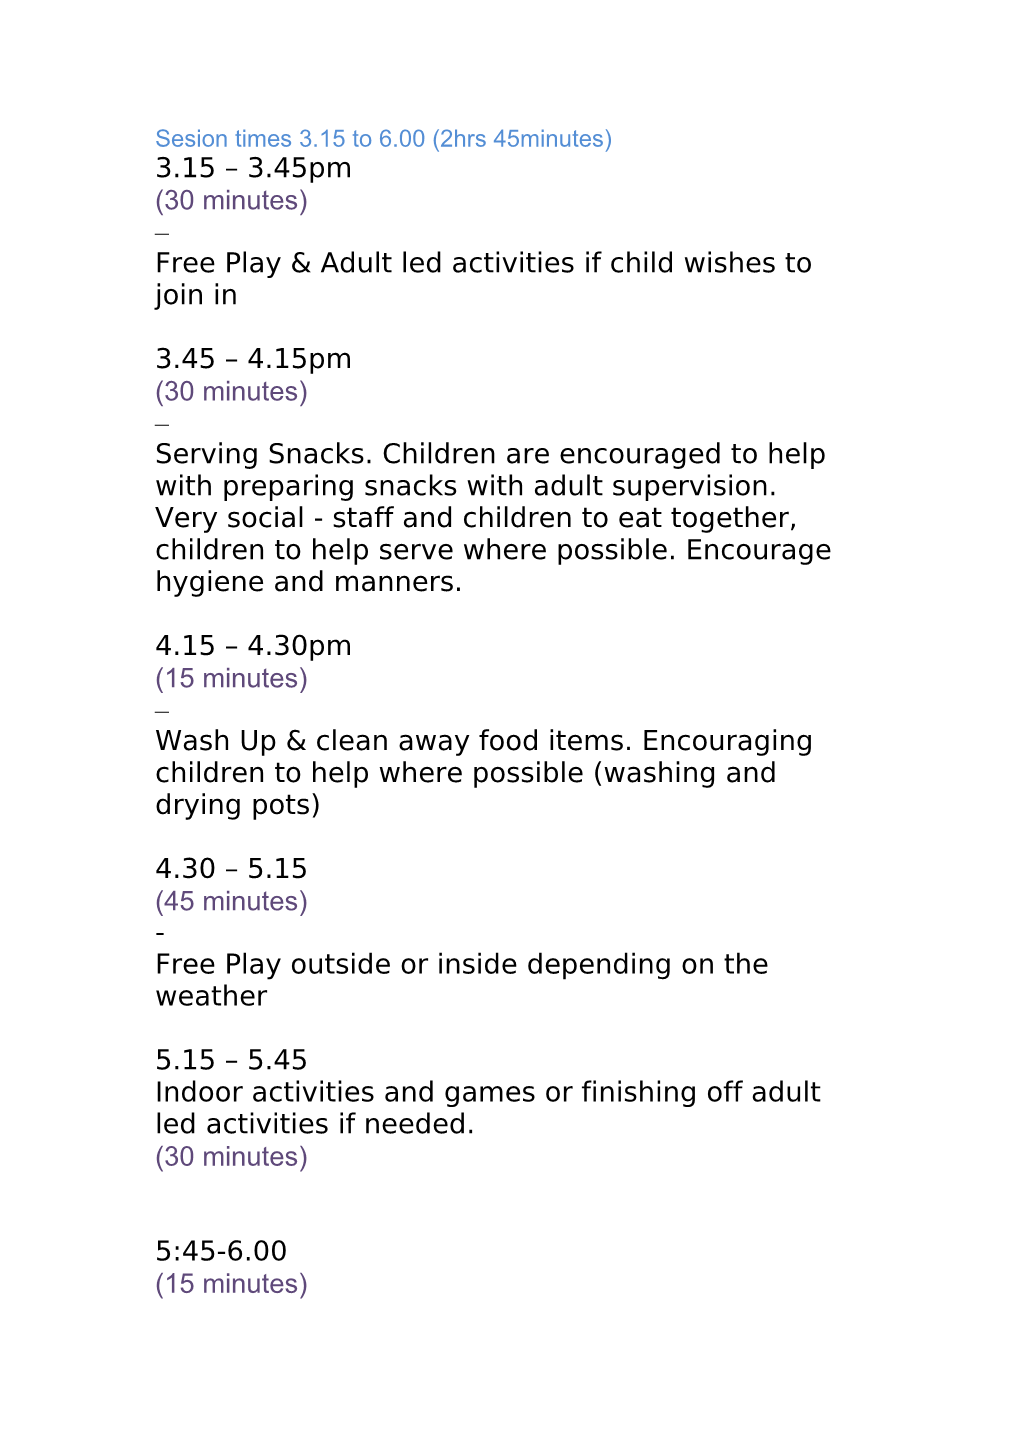 Free Play & Adult Led Activities If Child Wishes to Join In